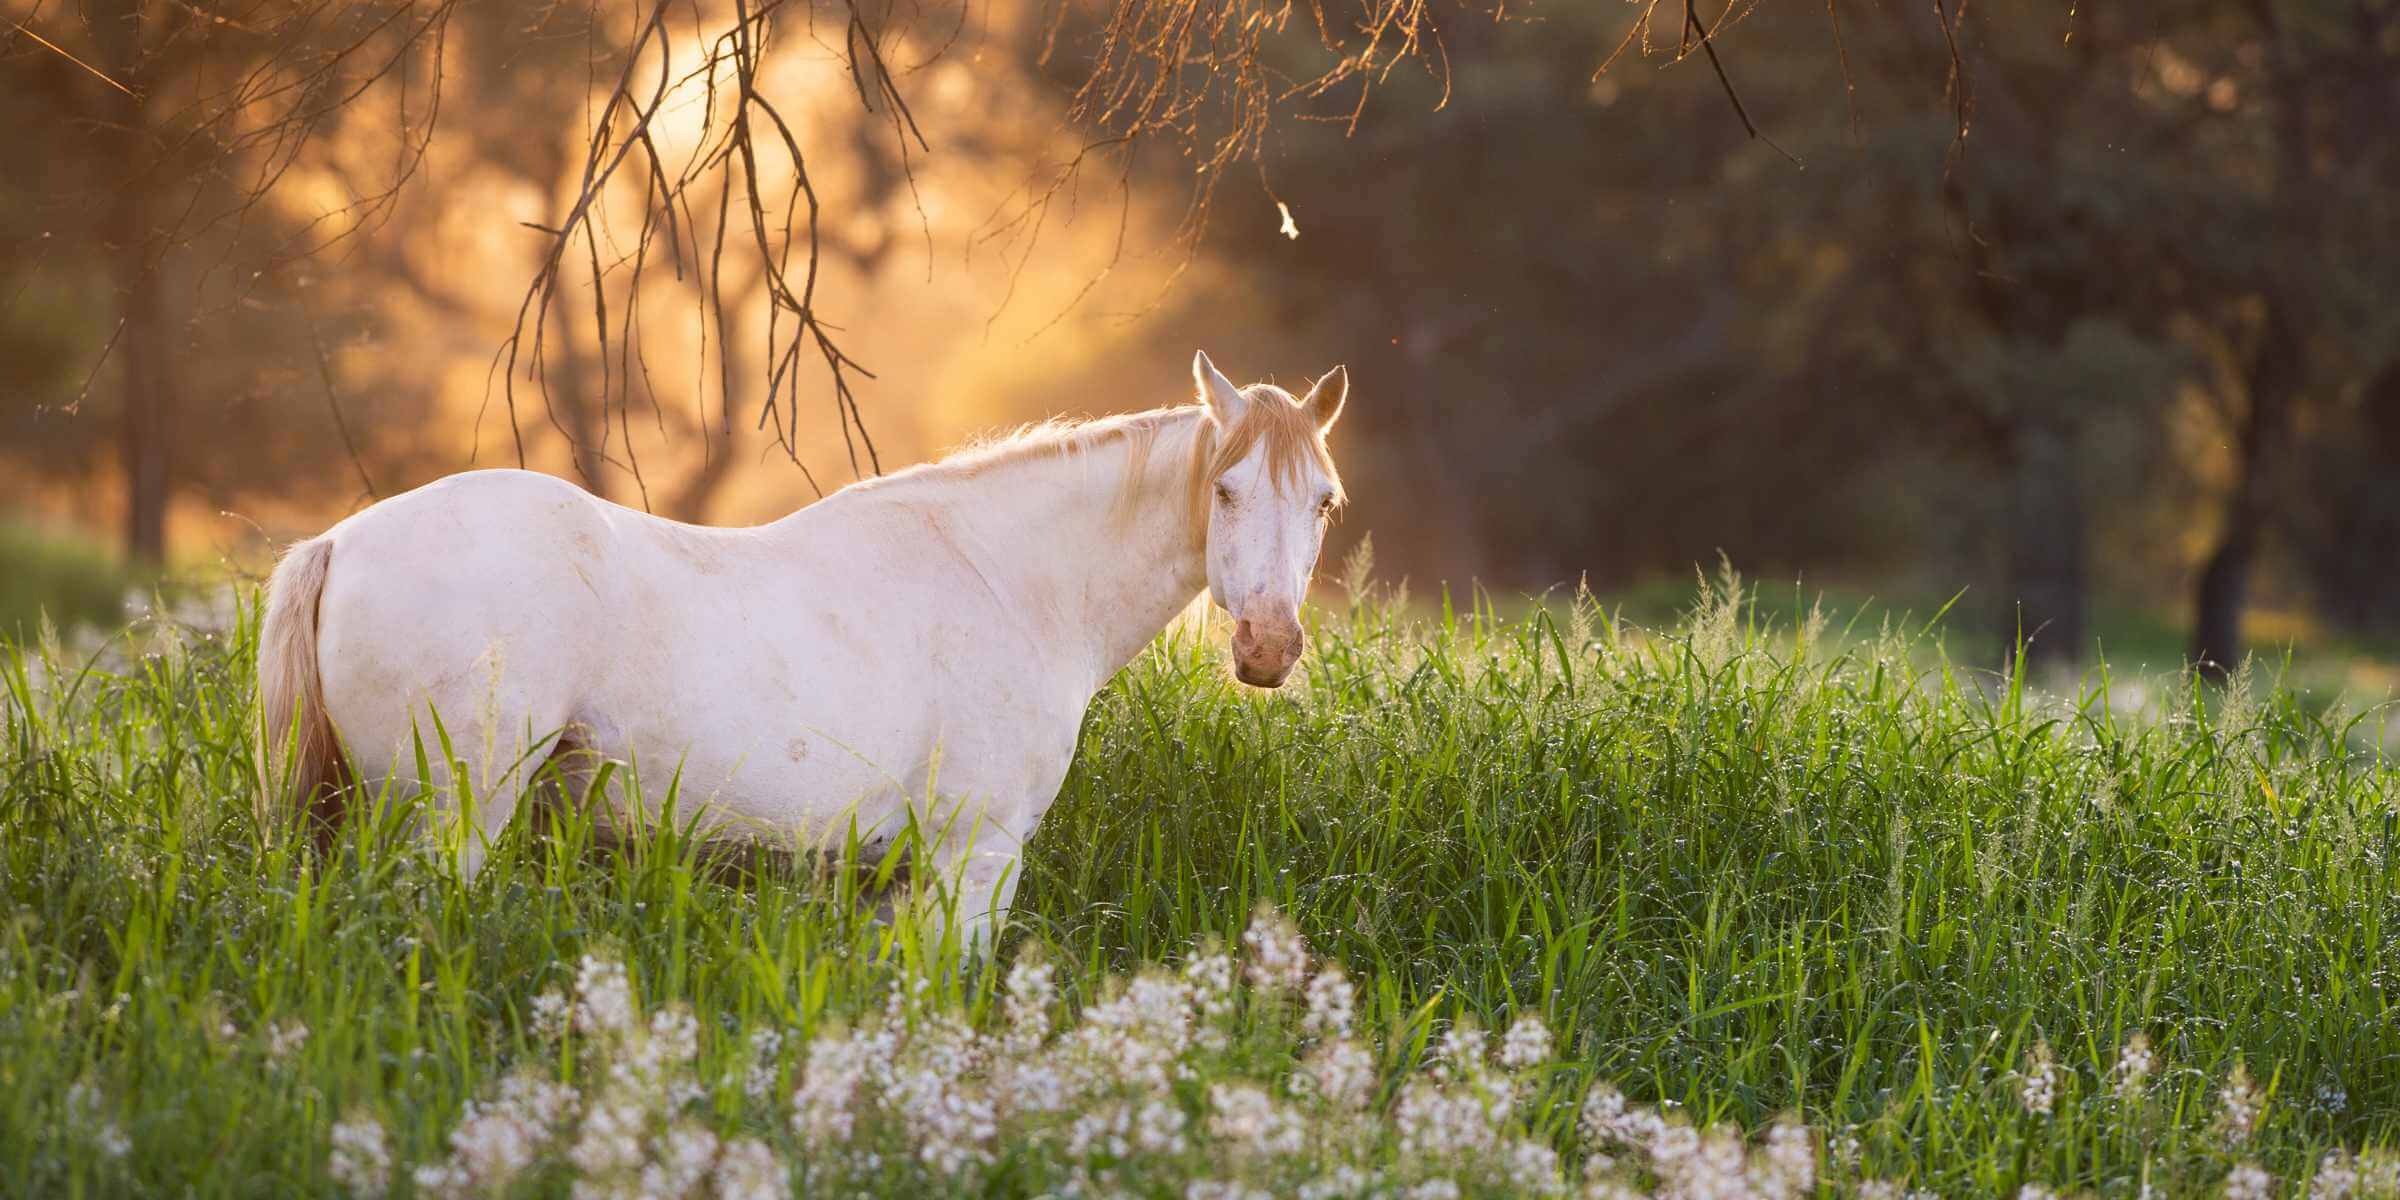 A white horse in the green grassy fields of Sandwerf after good rains.